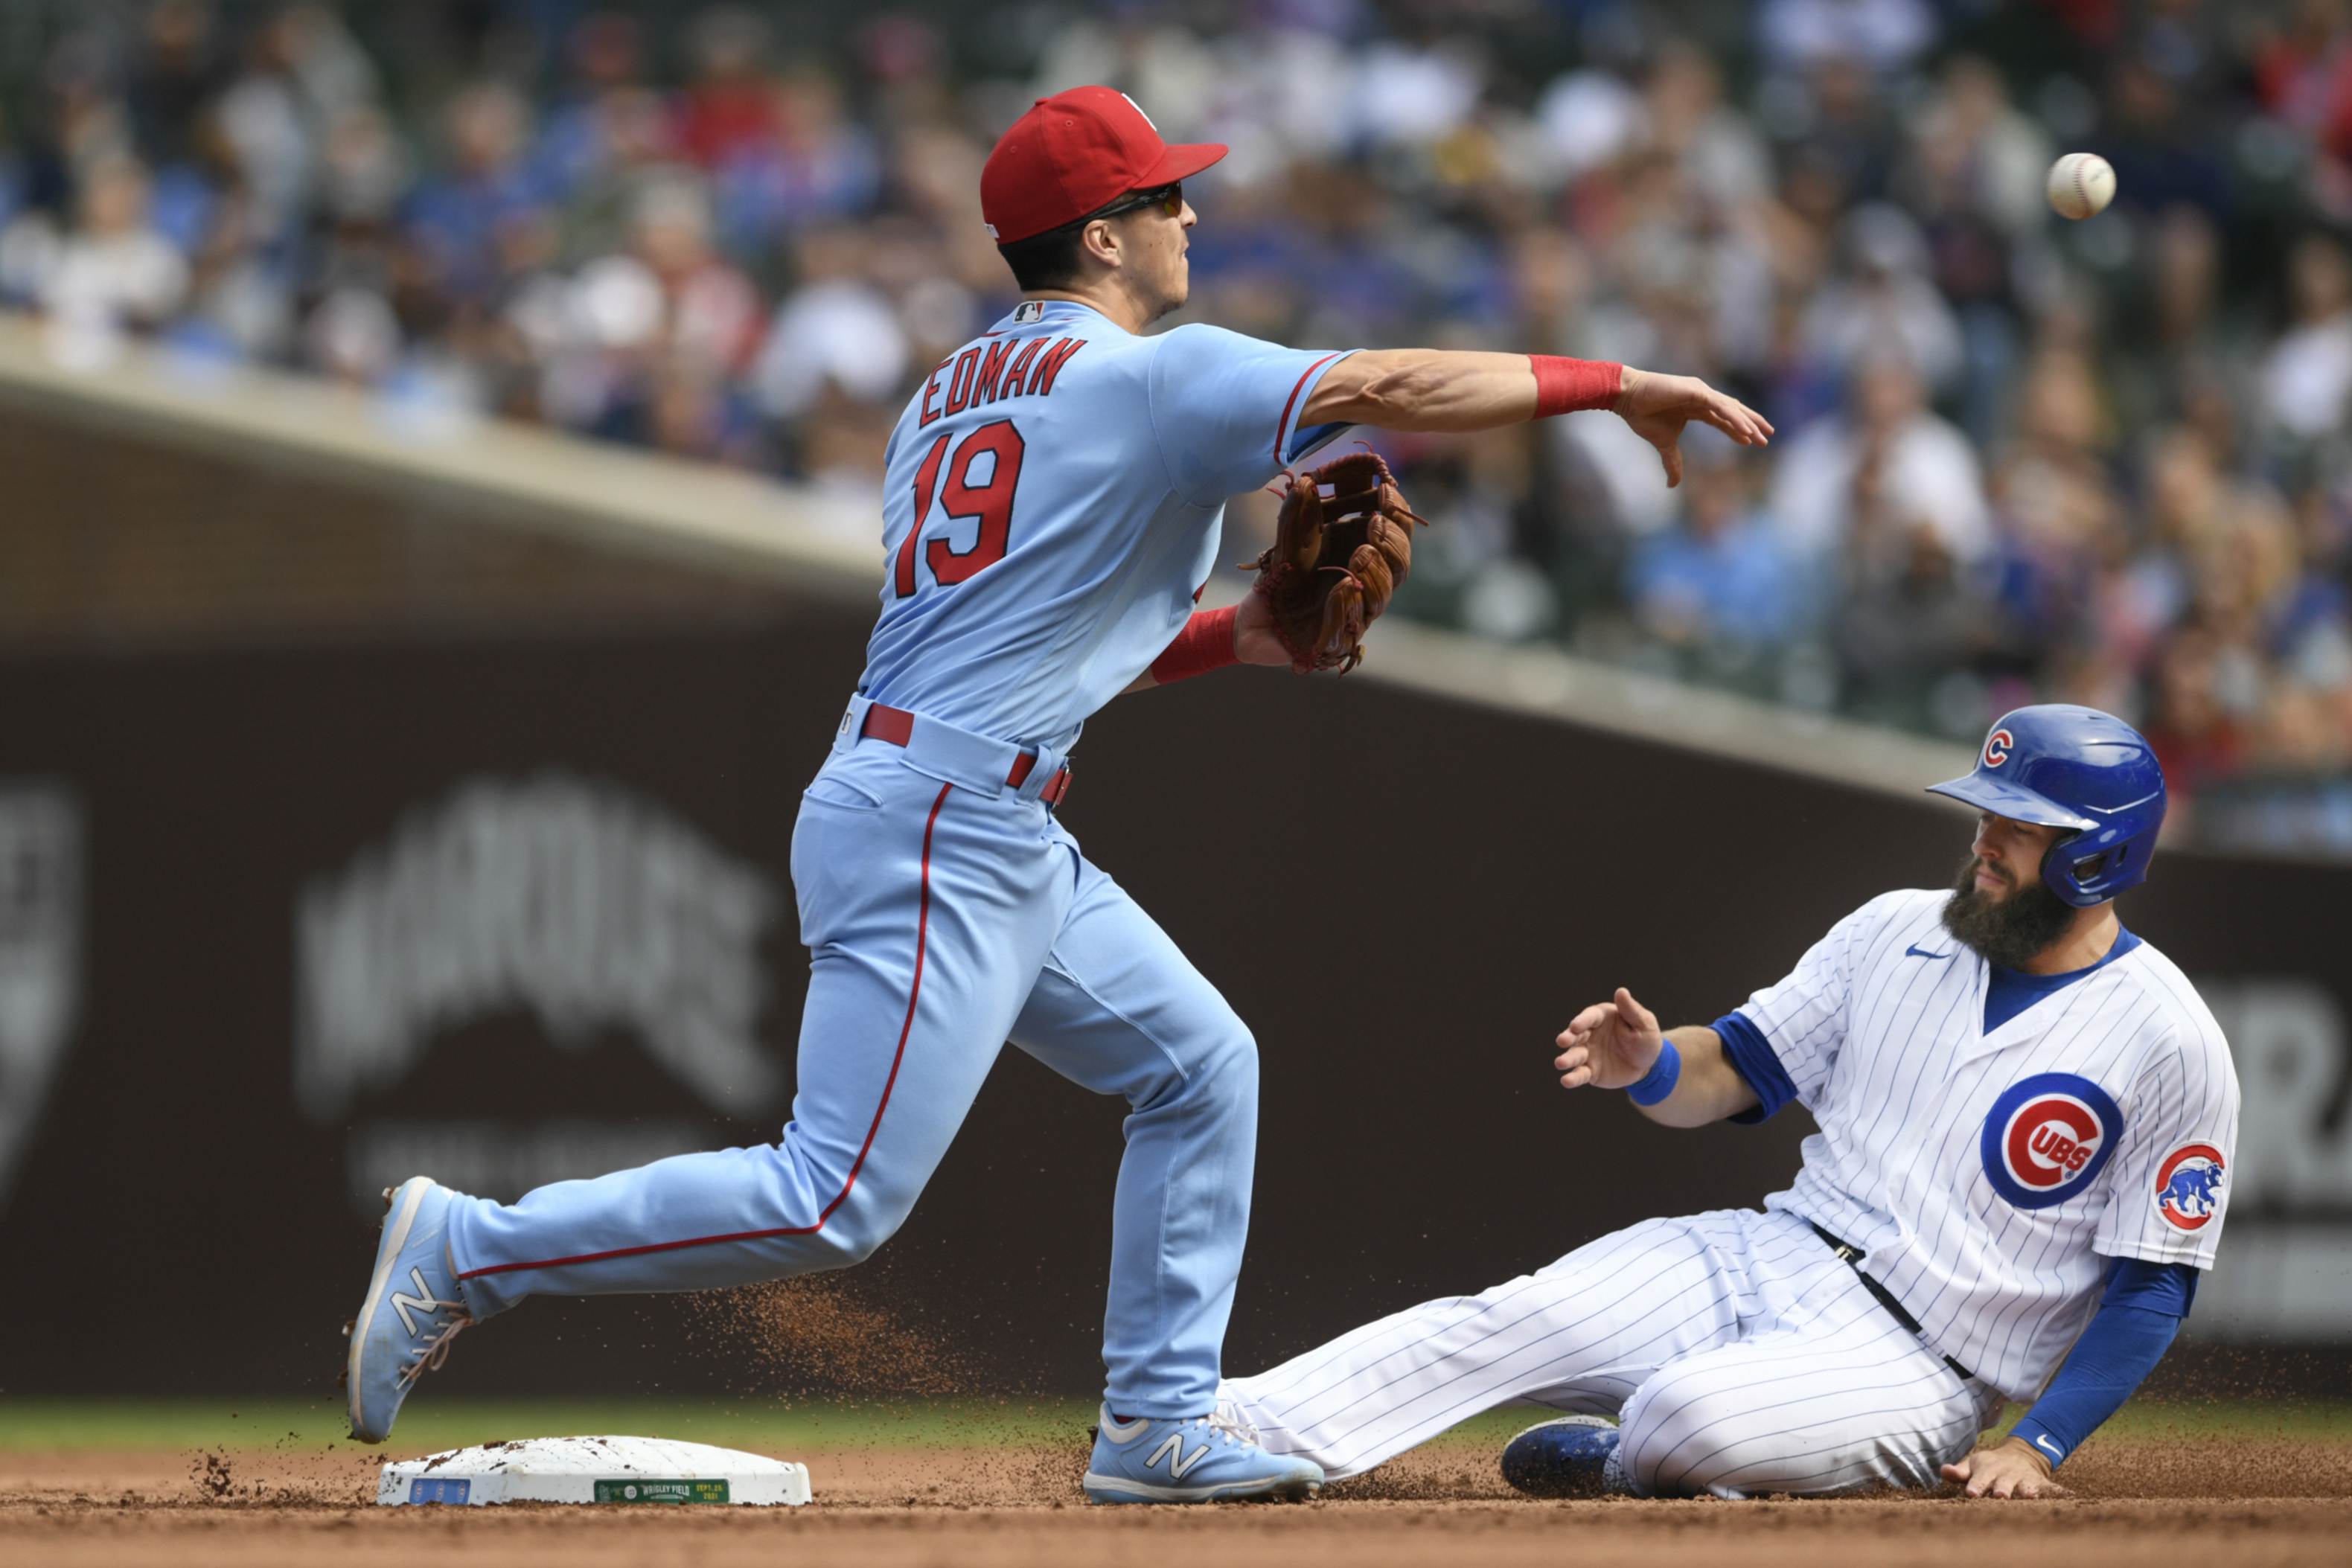 NEW RECORD! Cardinals win 15th straight game with comeback over Cubs